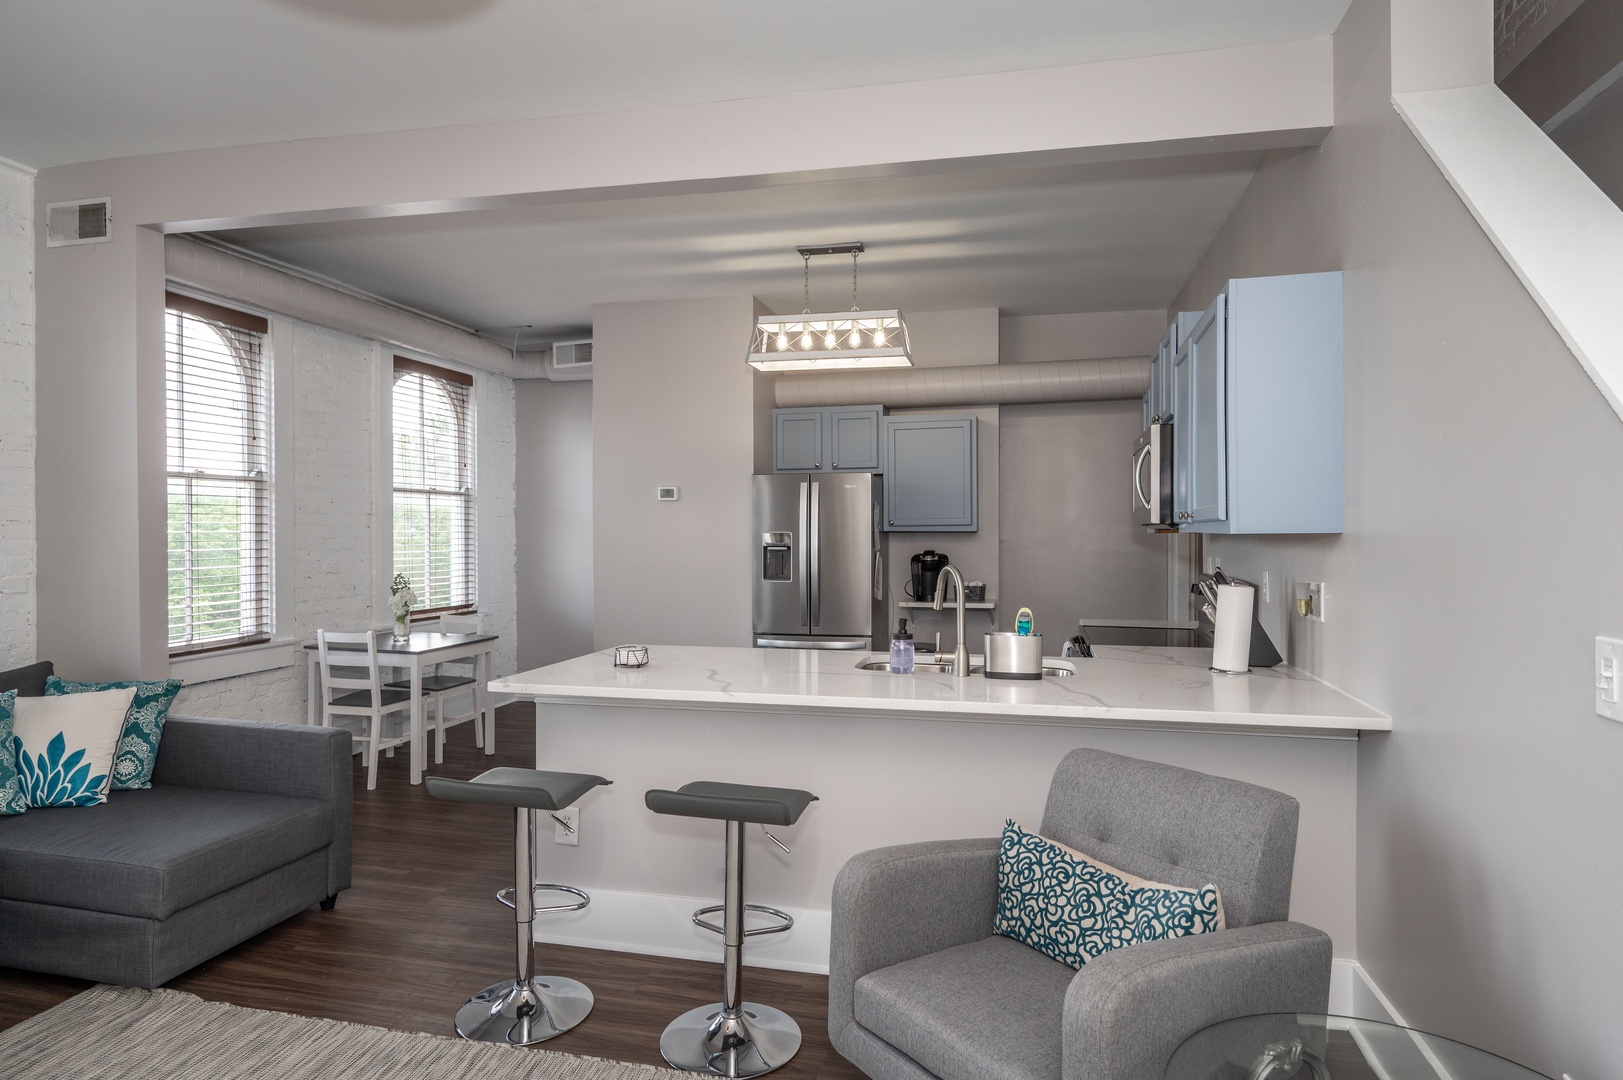 Apt 4 – The open kitchen counter offers dining seating for 2